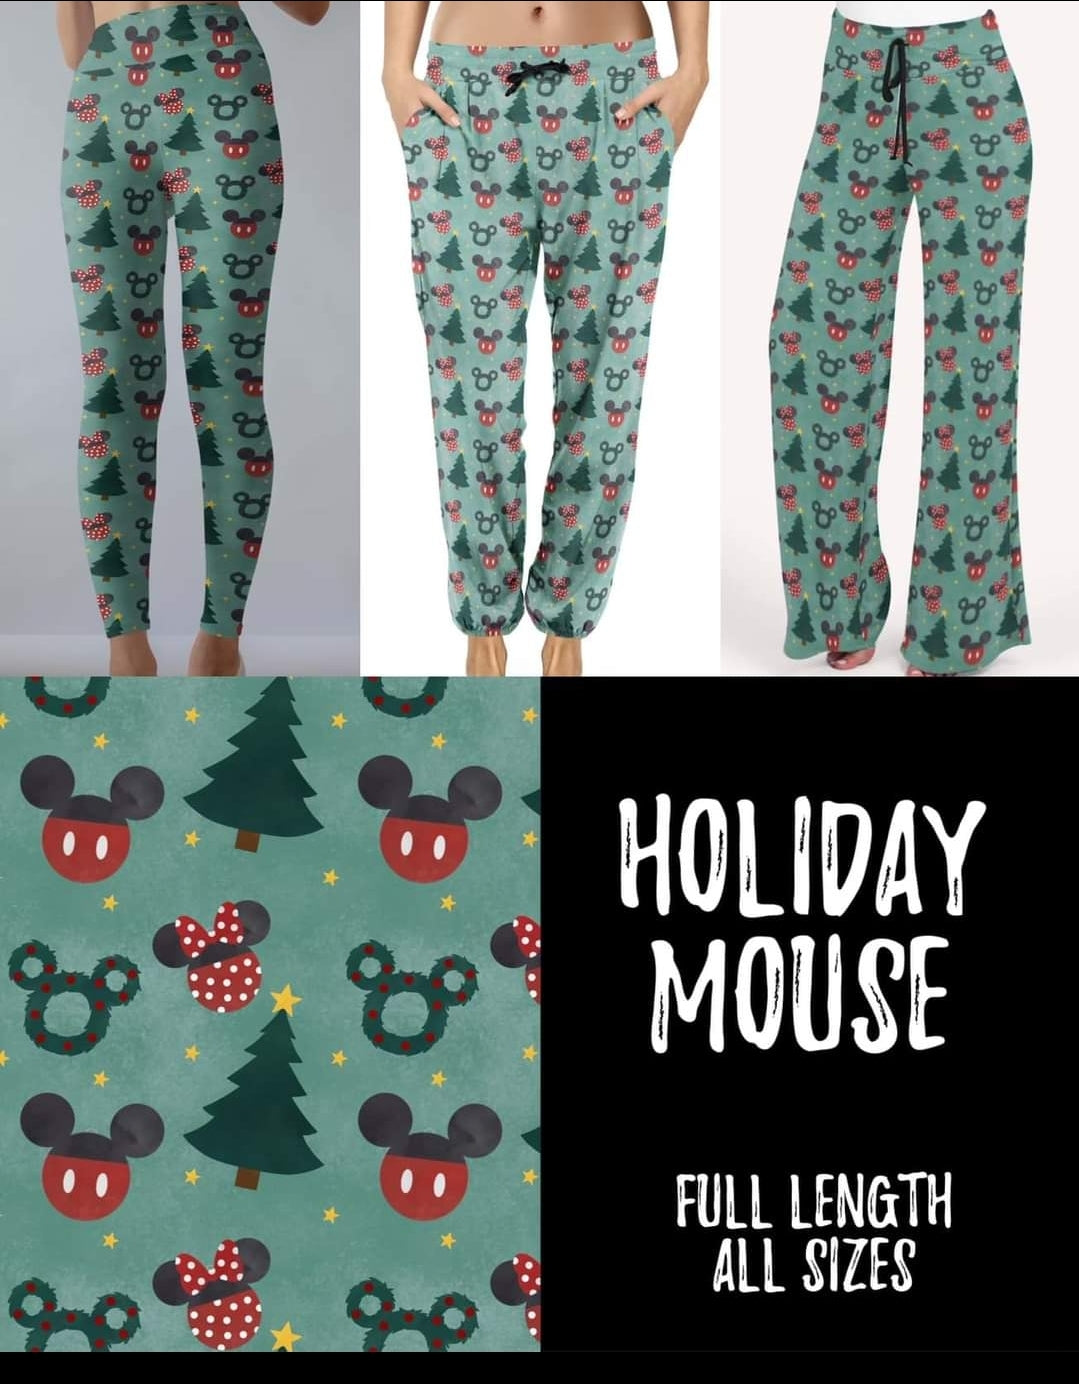 Holiday mouse leggings, joggers and lounge pants